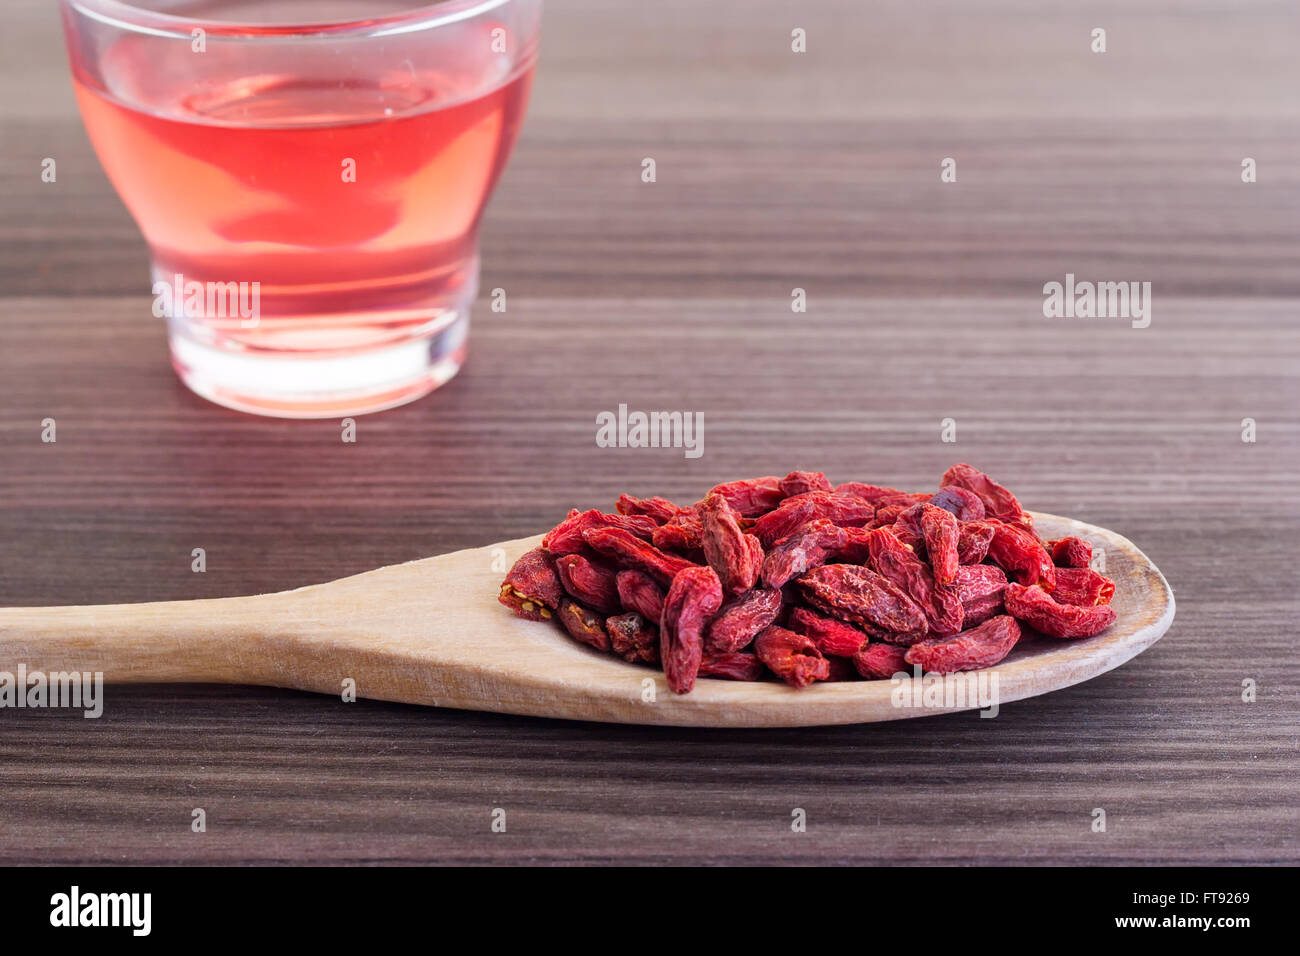 Dried goji berries in a wooden spoon with a small cup of tea on the side Stock Photo